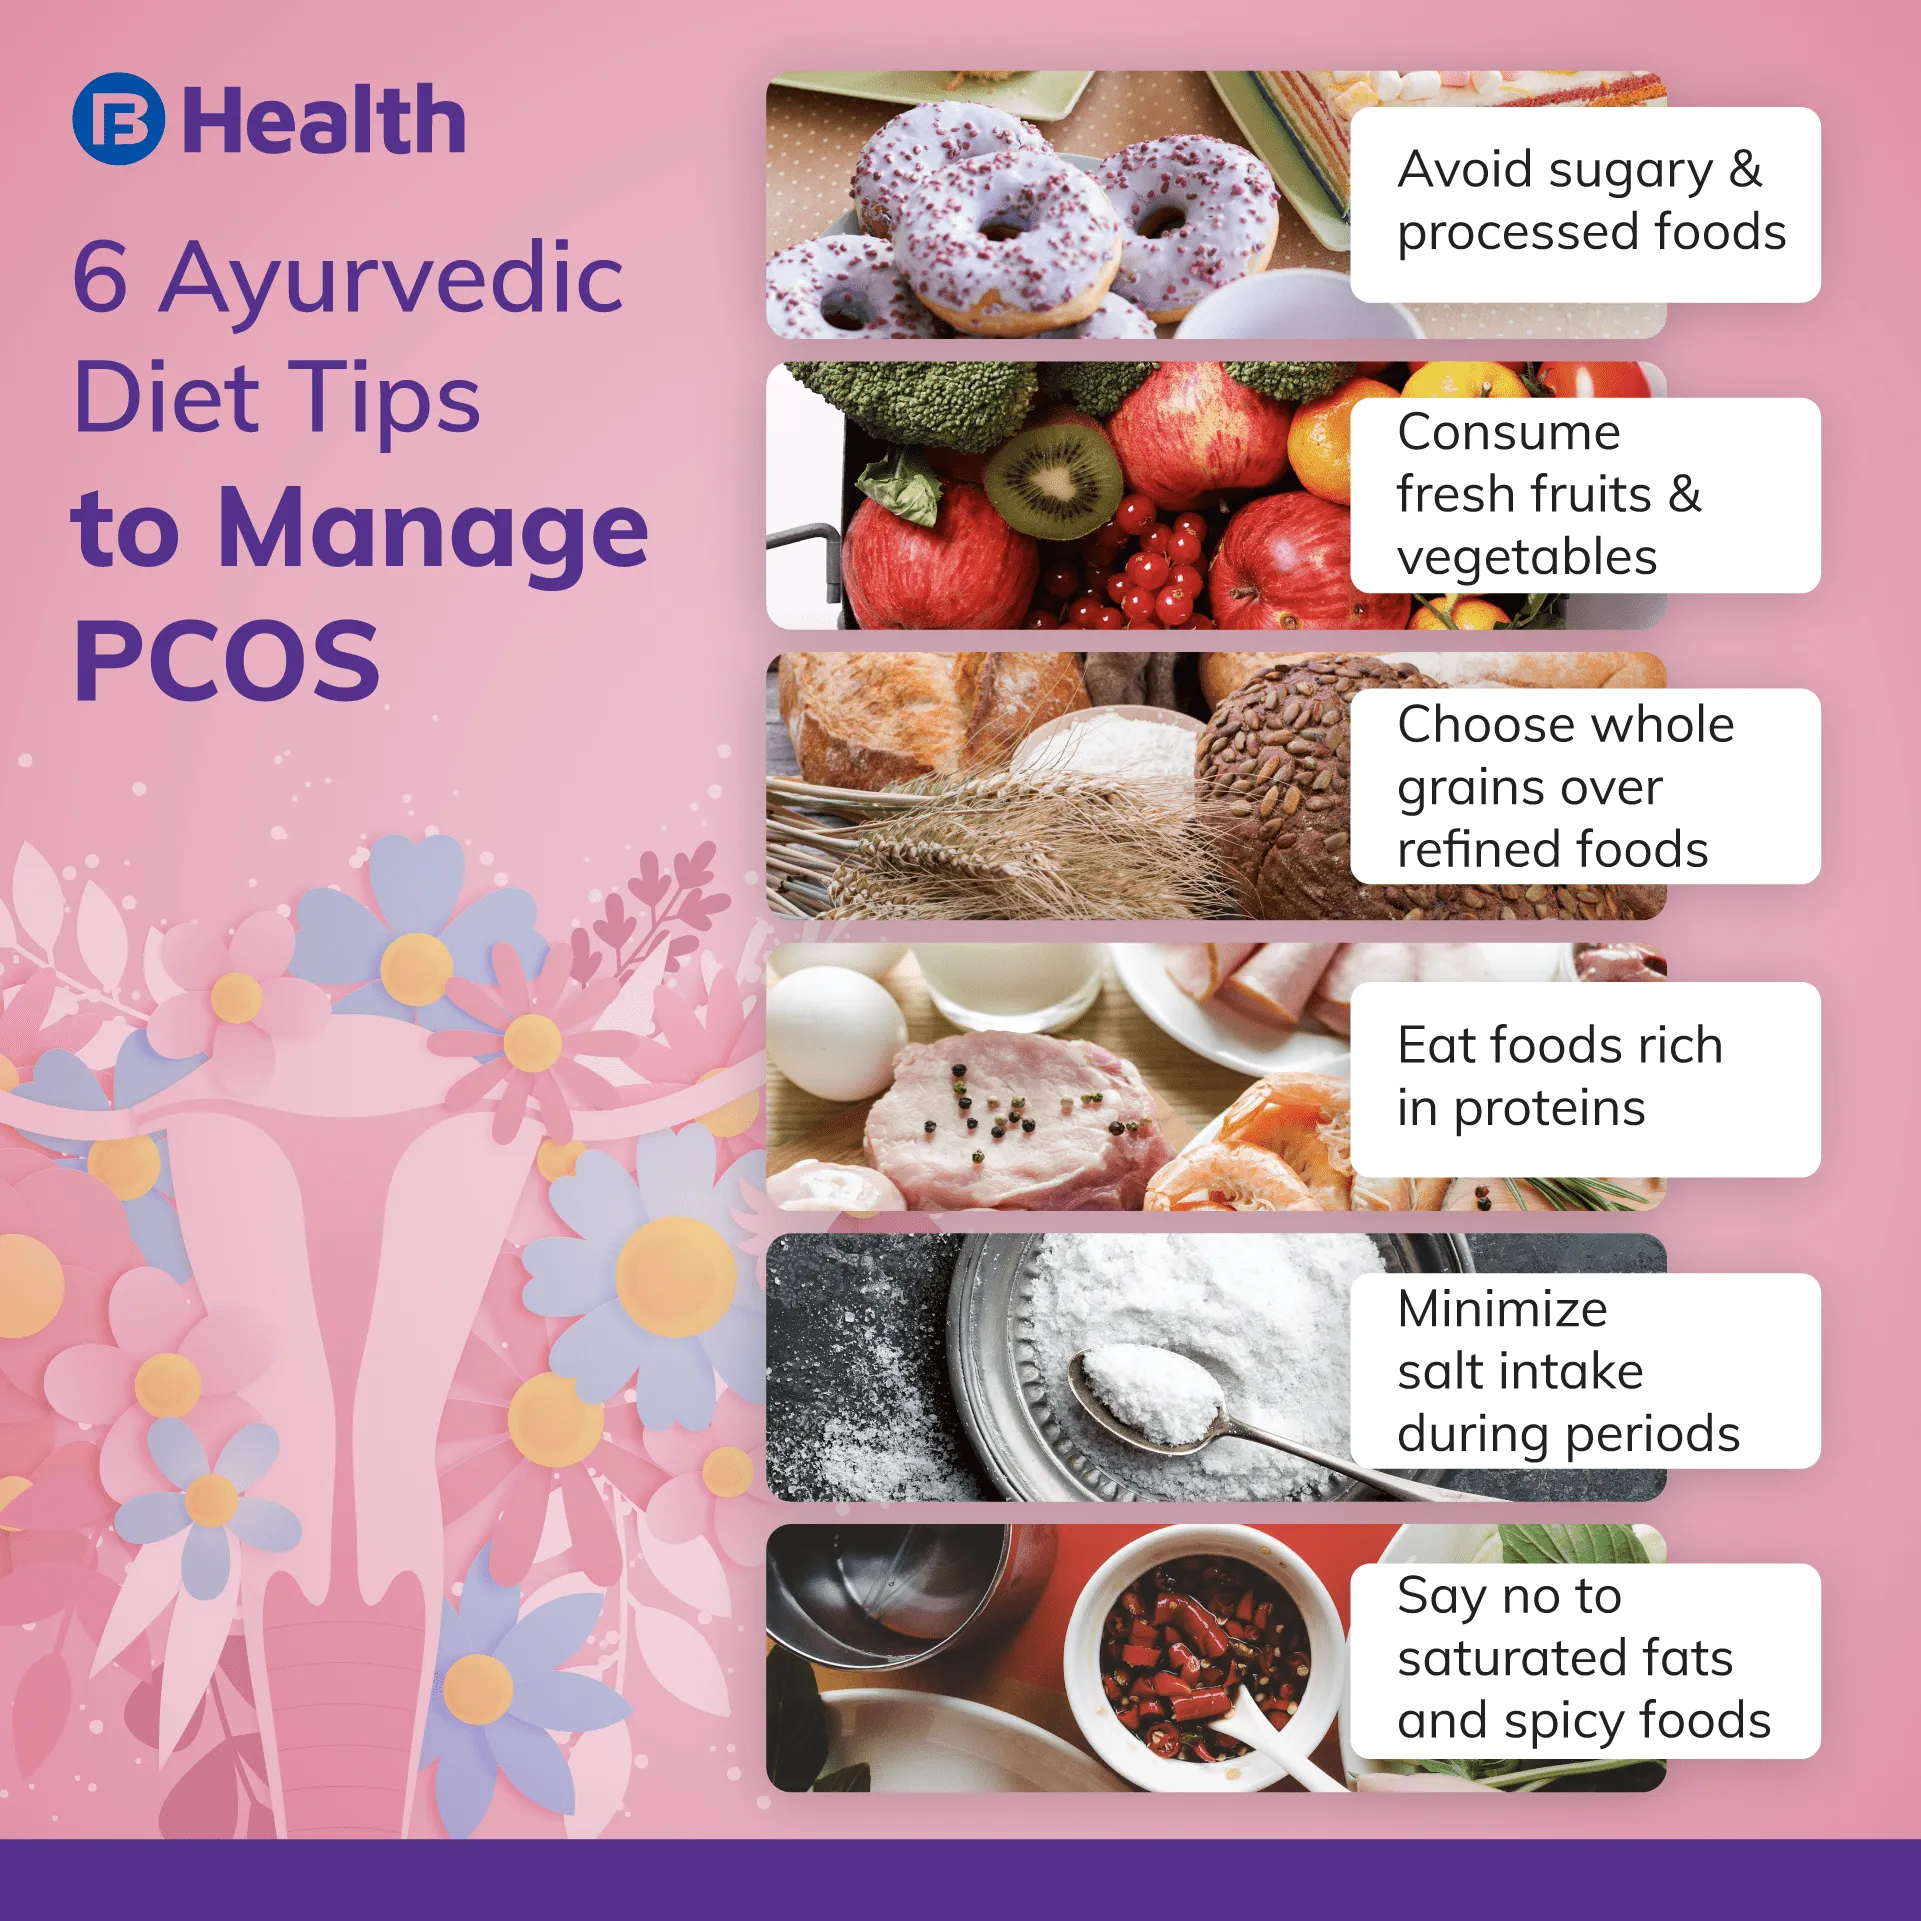 ayurveda diet tips to manage pcos